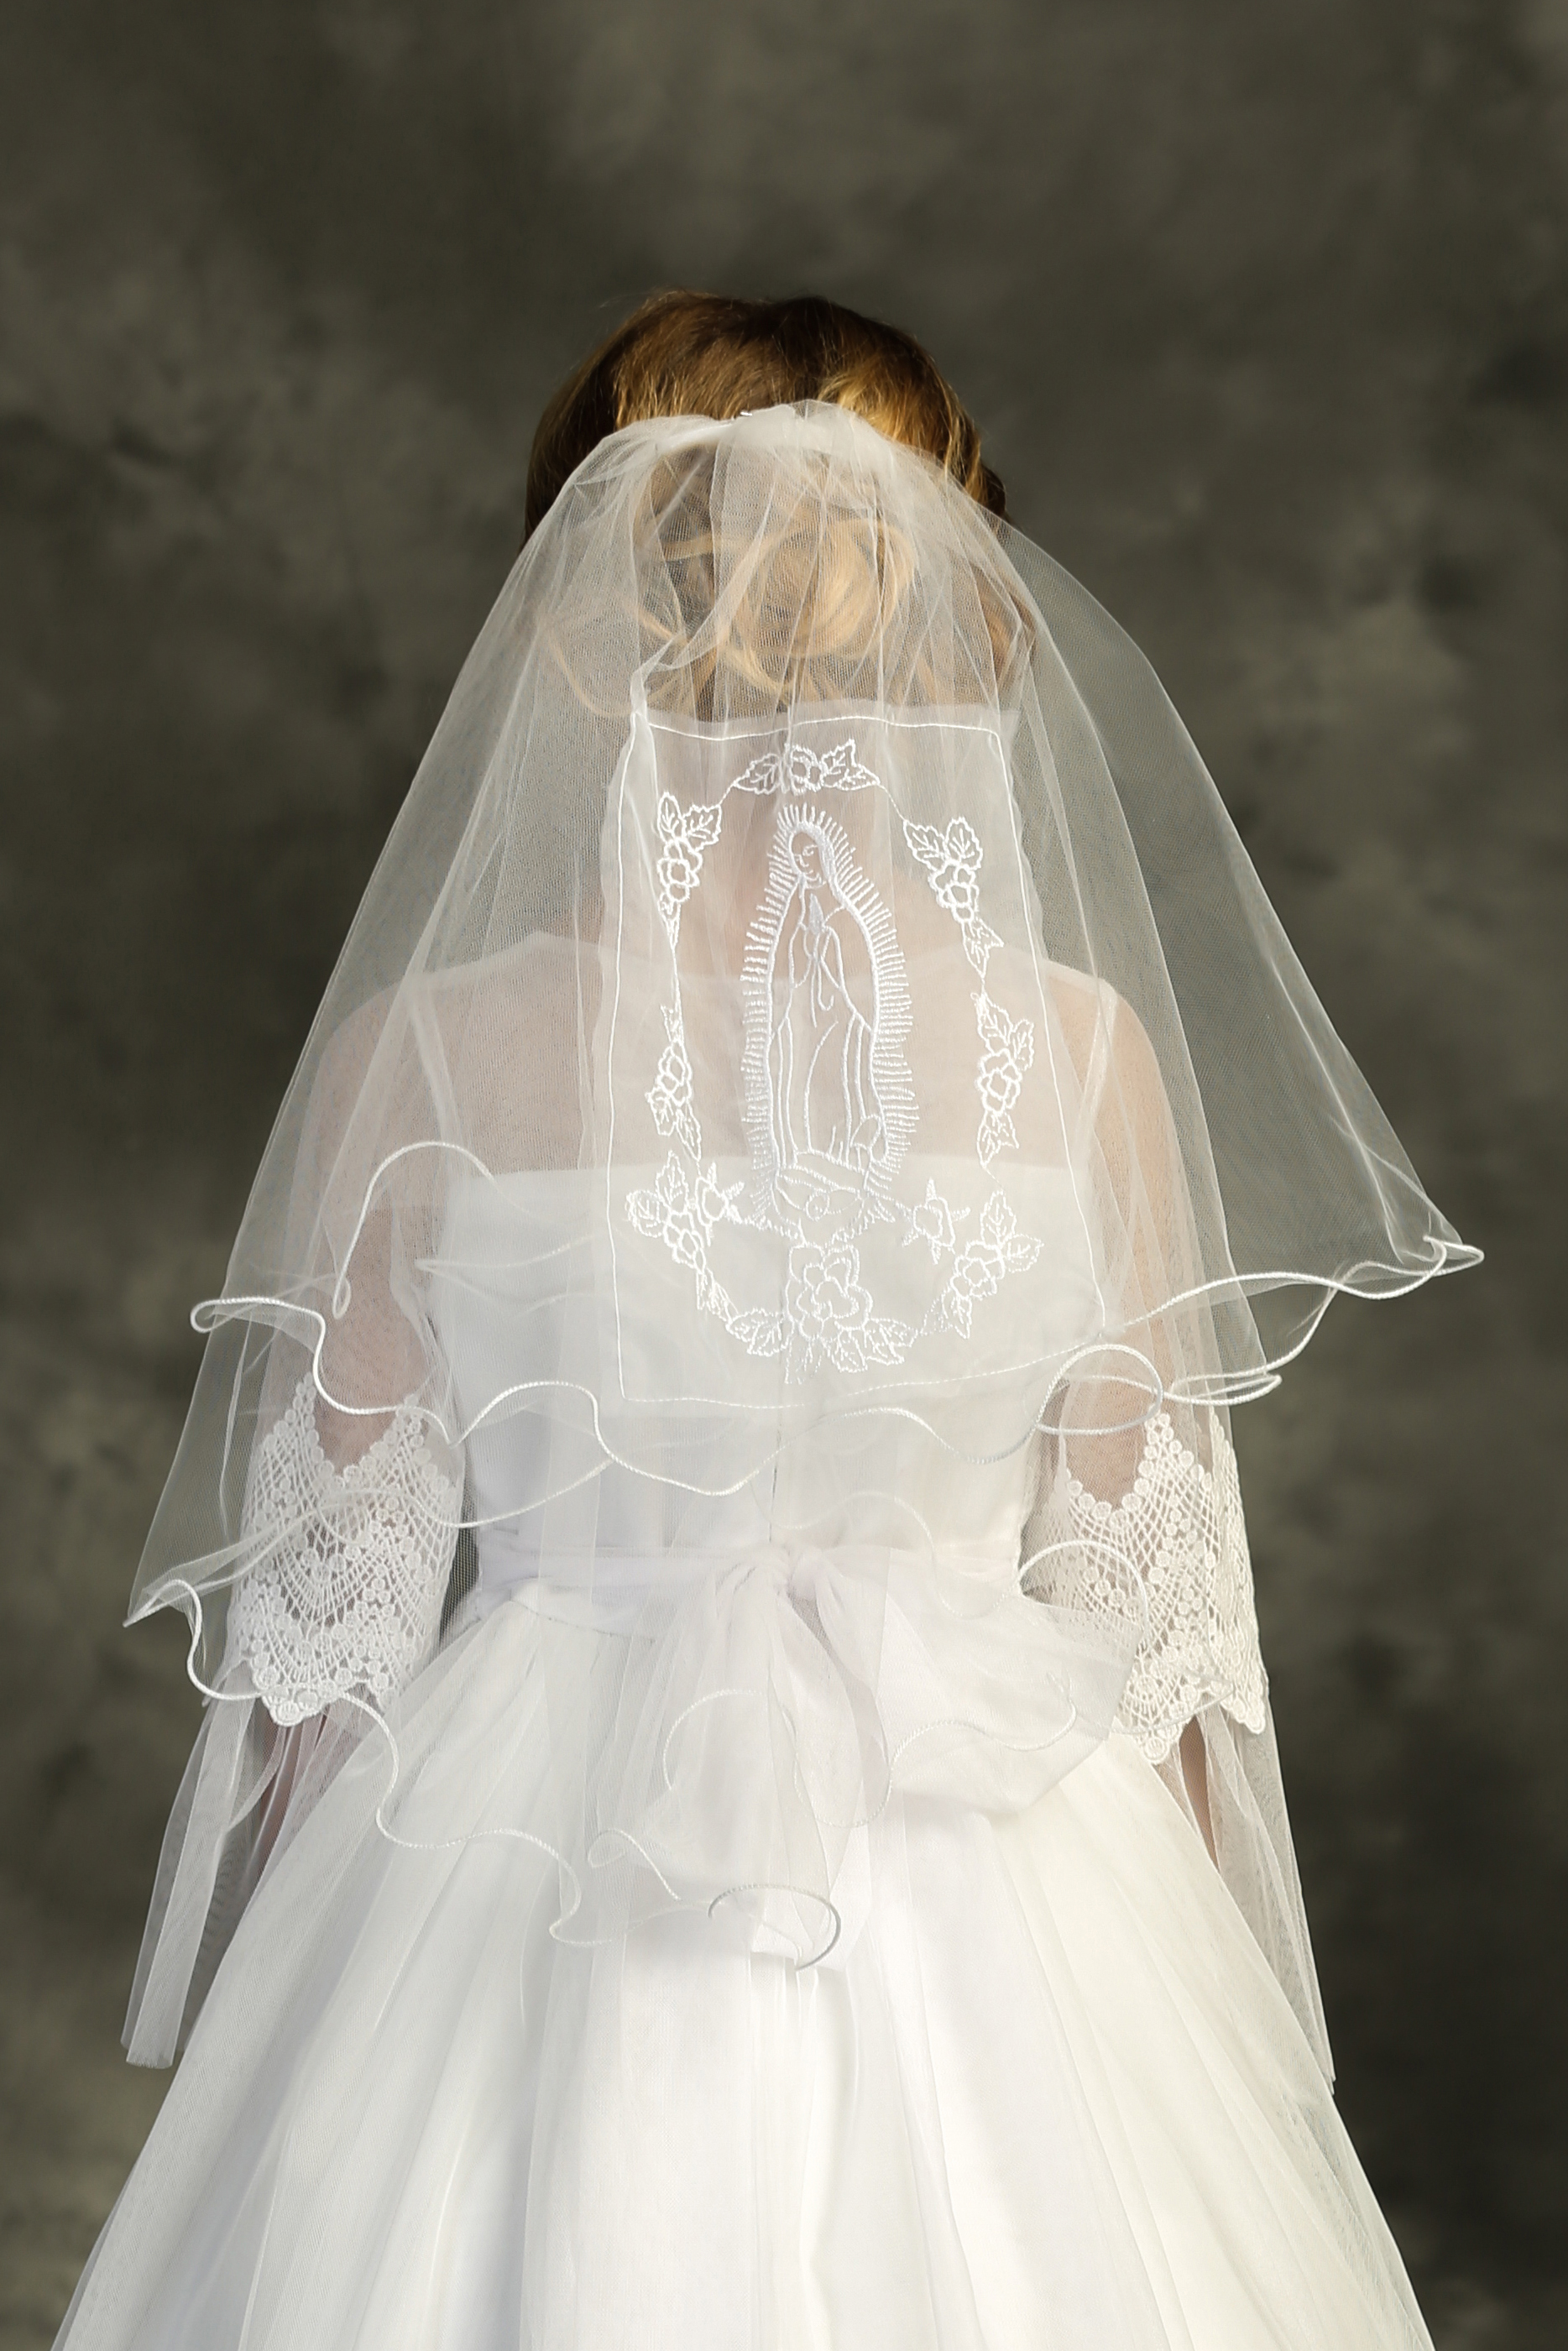 Catholic First Communion Veil with Embroidered Virgin Mary | Catholic